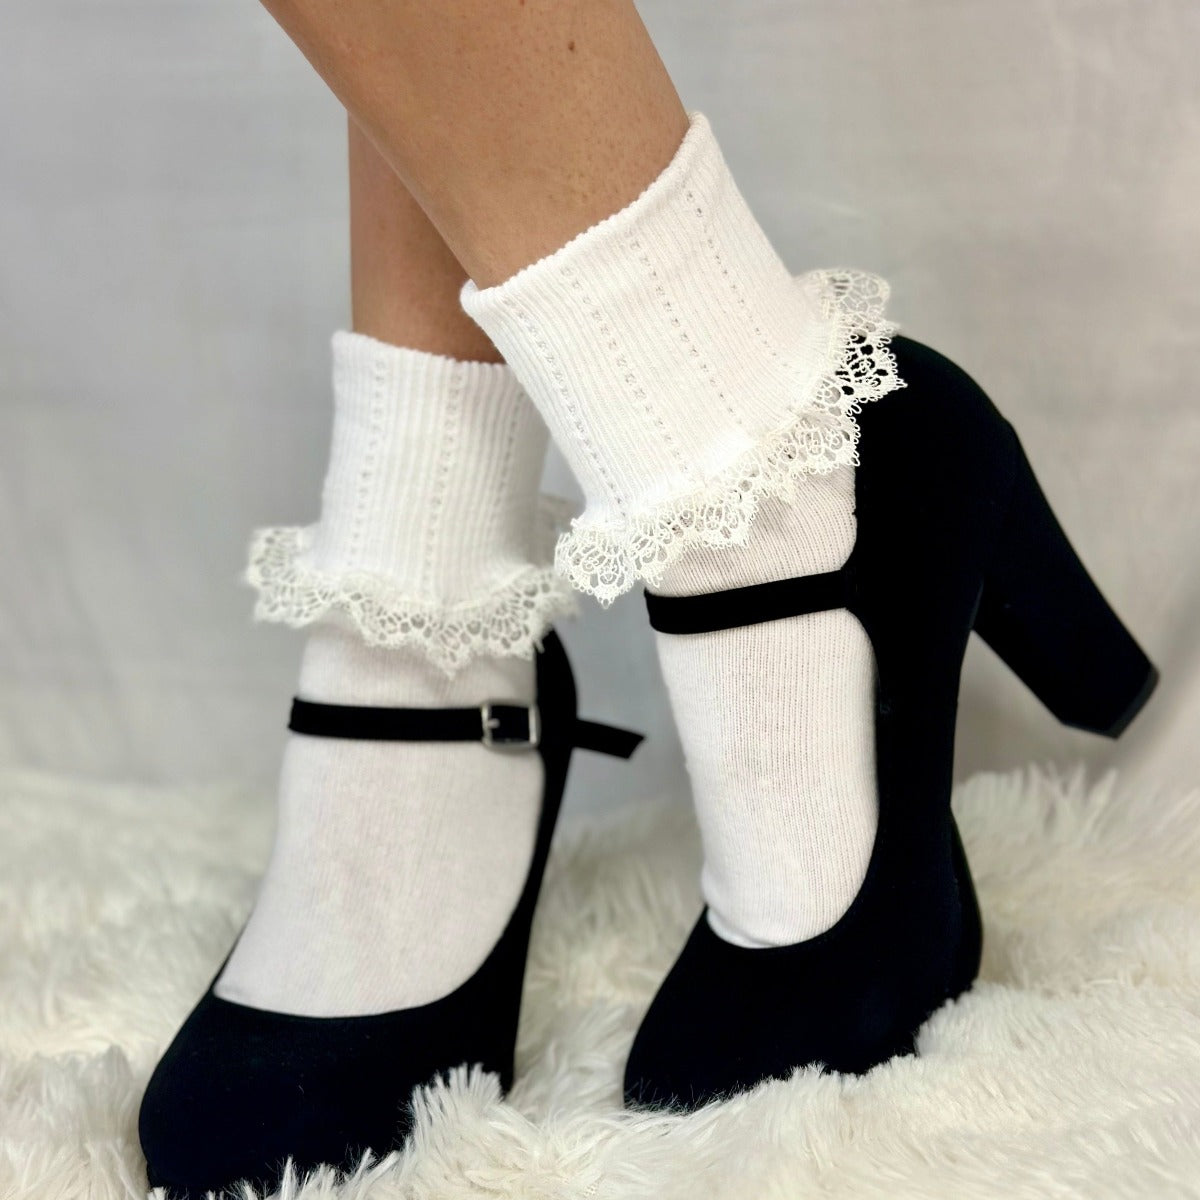 Tatted lace cuff ankle socks white, ladies lace trimmed socks, best quality lace socks women’s 